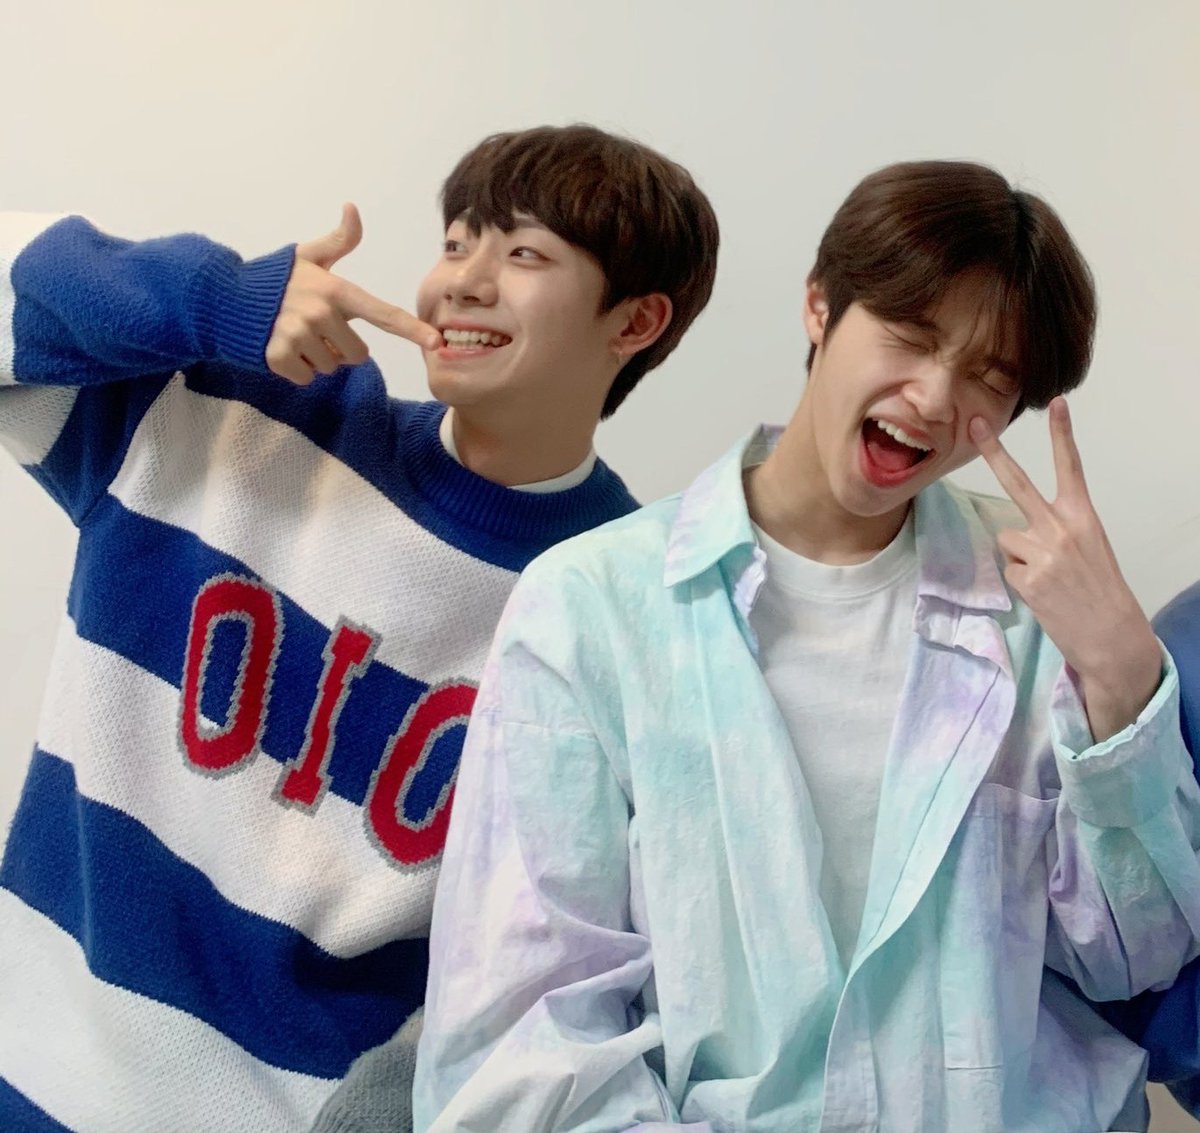 - according to pyo, hojin said he came to DSP because he wants to see Dongpyo - hojin said that he liked dongpyo during pdx101 and came to DSP afterwards  https://twitter.com/chickdongpyo/status/1248171806705348610?s=19